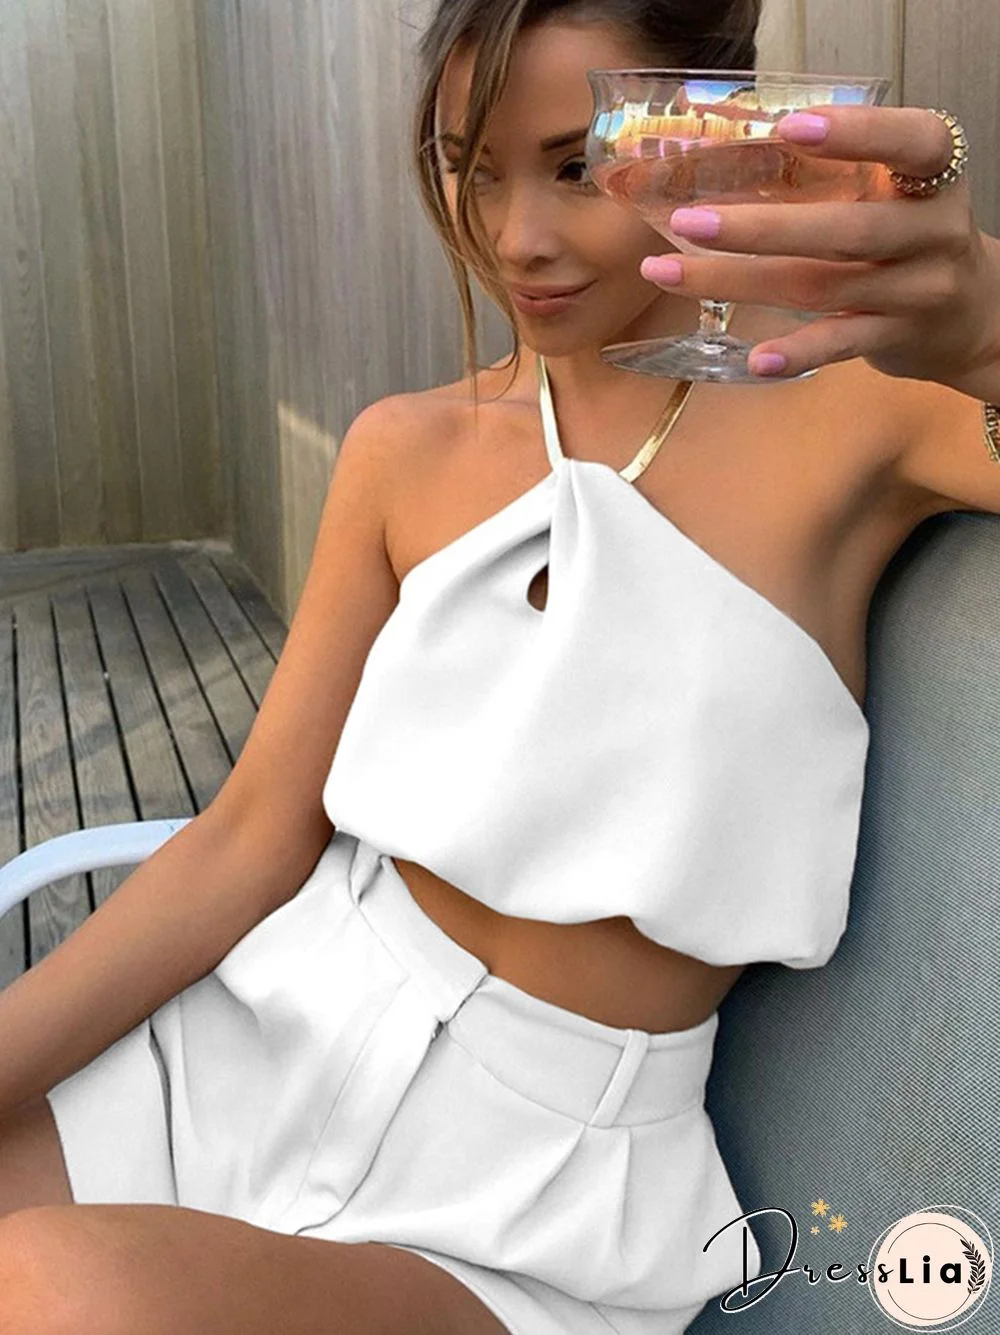 Forefair Halter Summer Crop Top Strapless Chain Neck Twist Fashion Lady Sexy Outfits Party Off Shoulder Women Tops